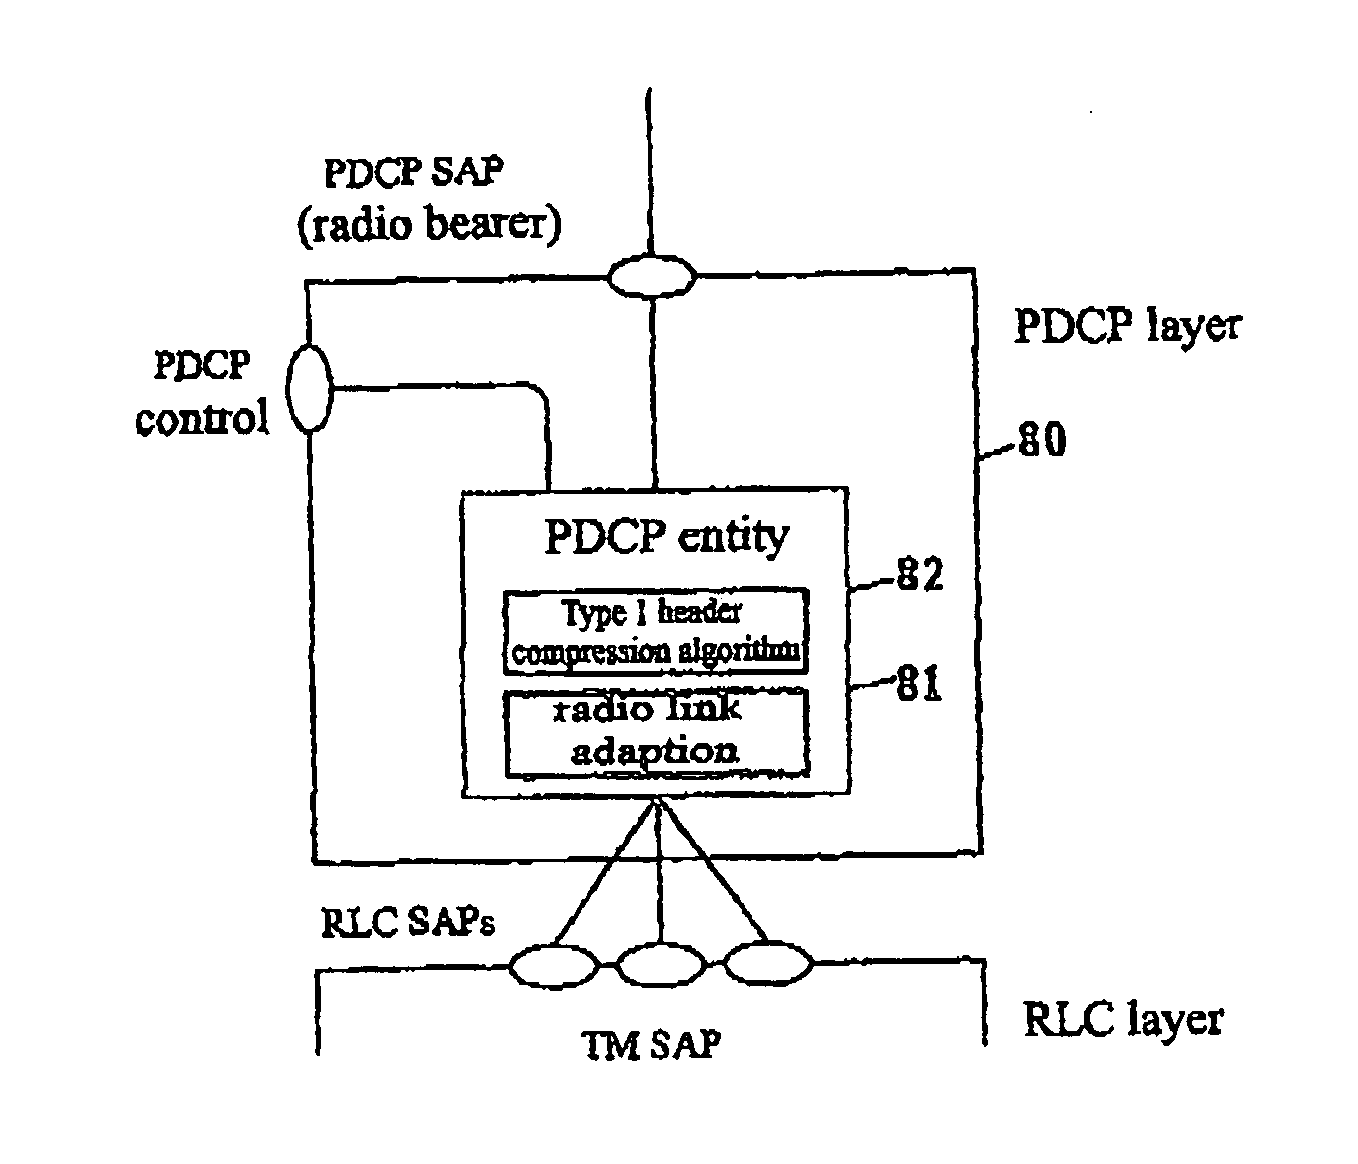 Apparatus and Method for Radio Transmission of Real-Time Ip Packets Using Header Compression Technique